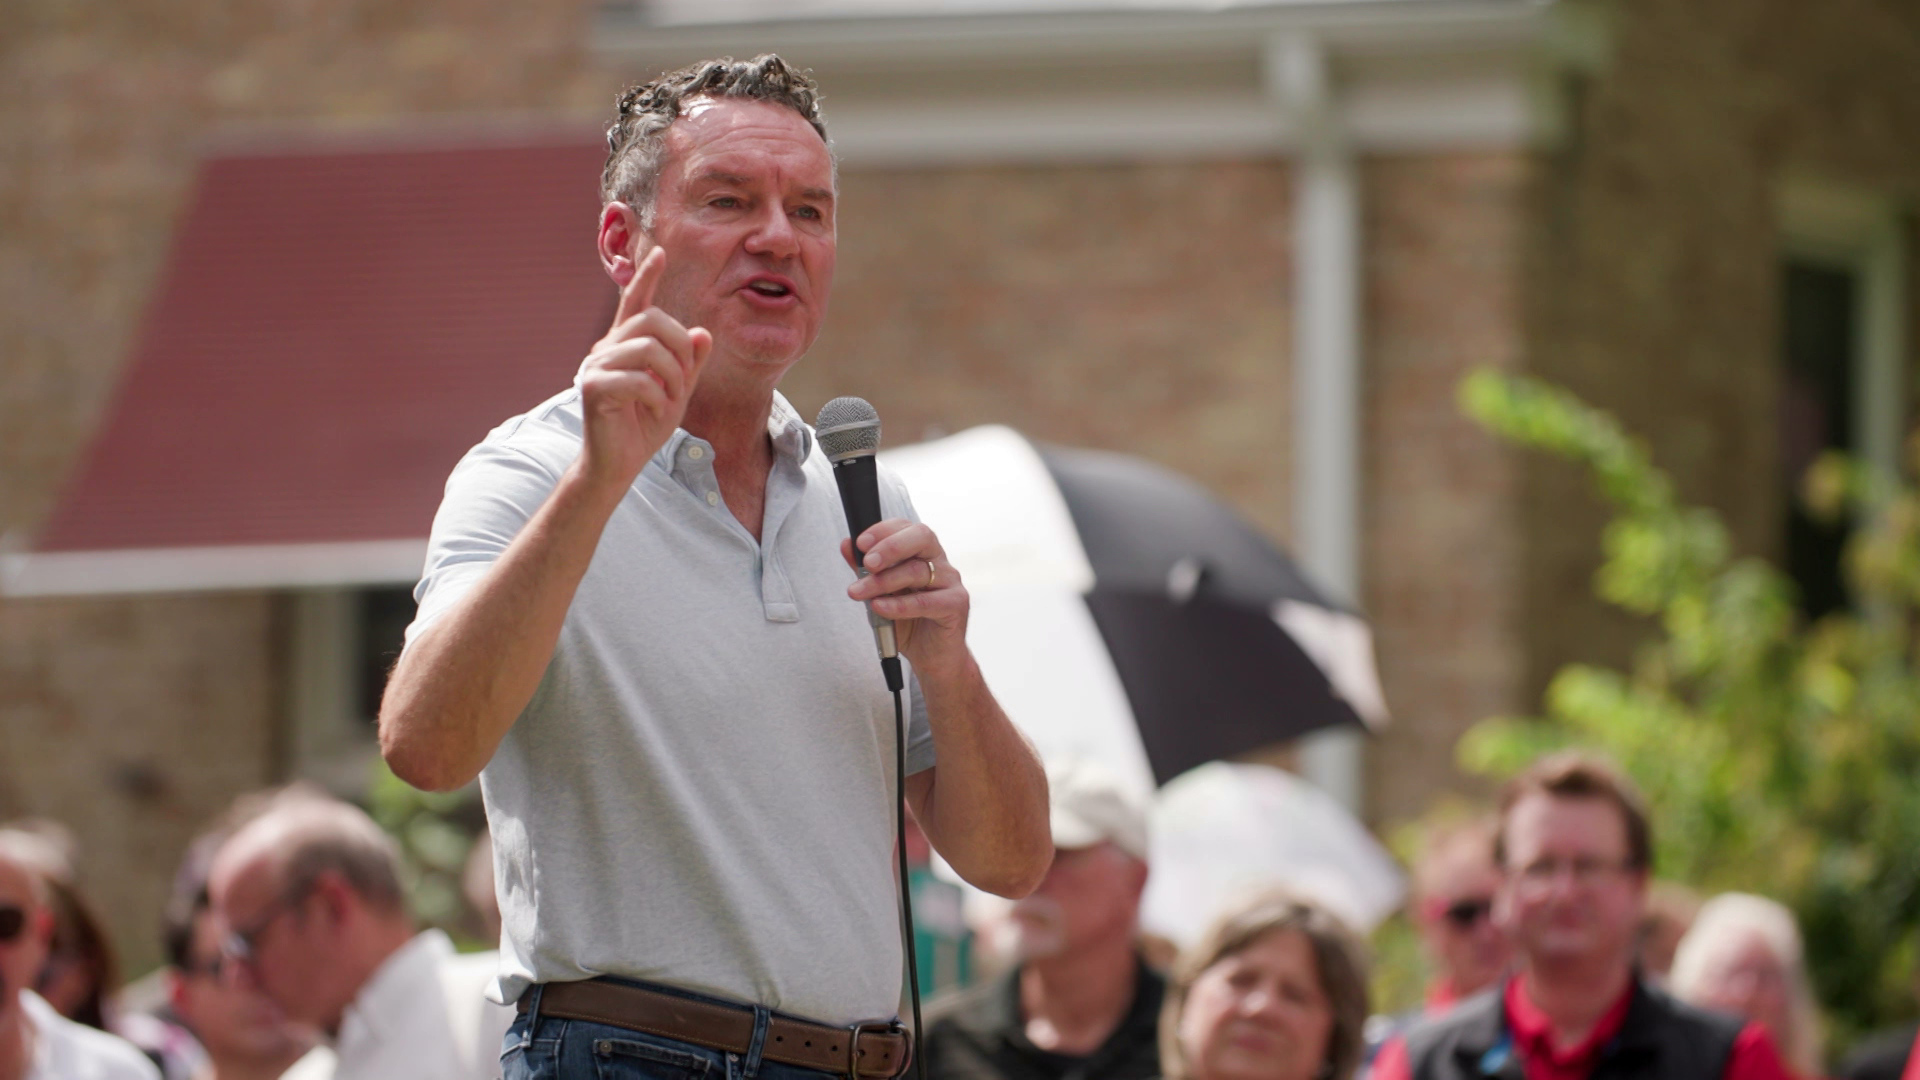 Tim Michels stands and speaks outdoors, holding a microphone in his left hand and gesturing with his right hand, with standing people and a brick building in the background.